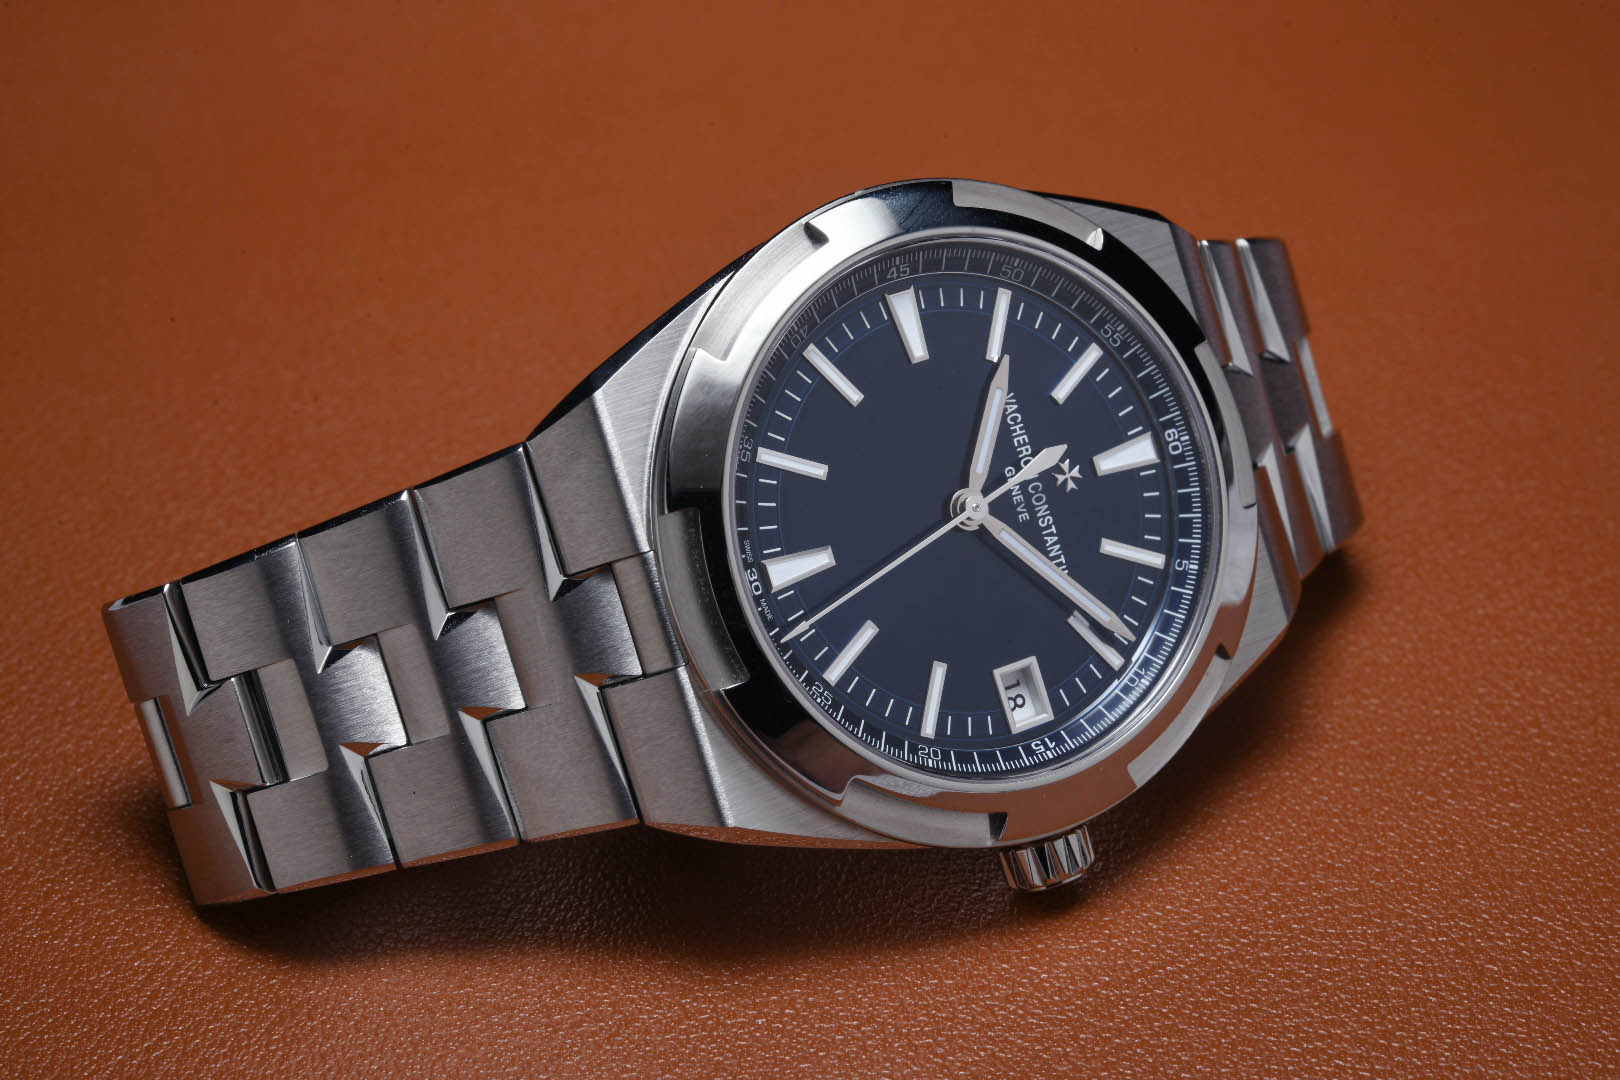 Owner review: Vacheron Constantin Overseas Dual Time - FIFTH WRIST